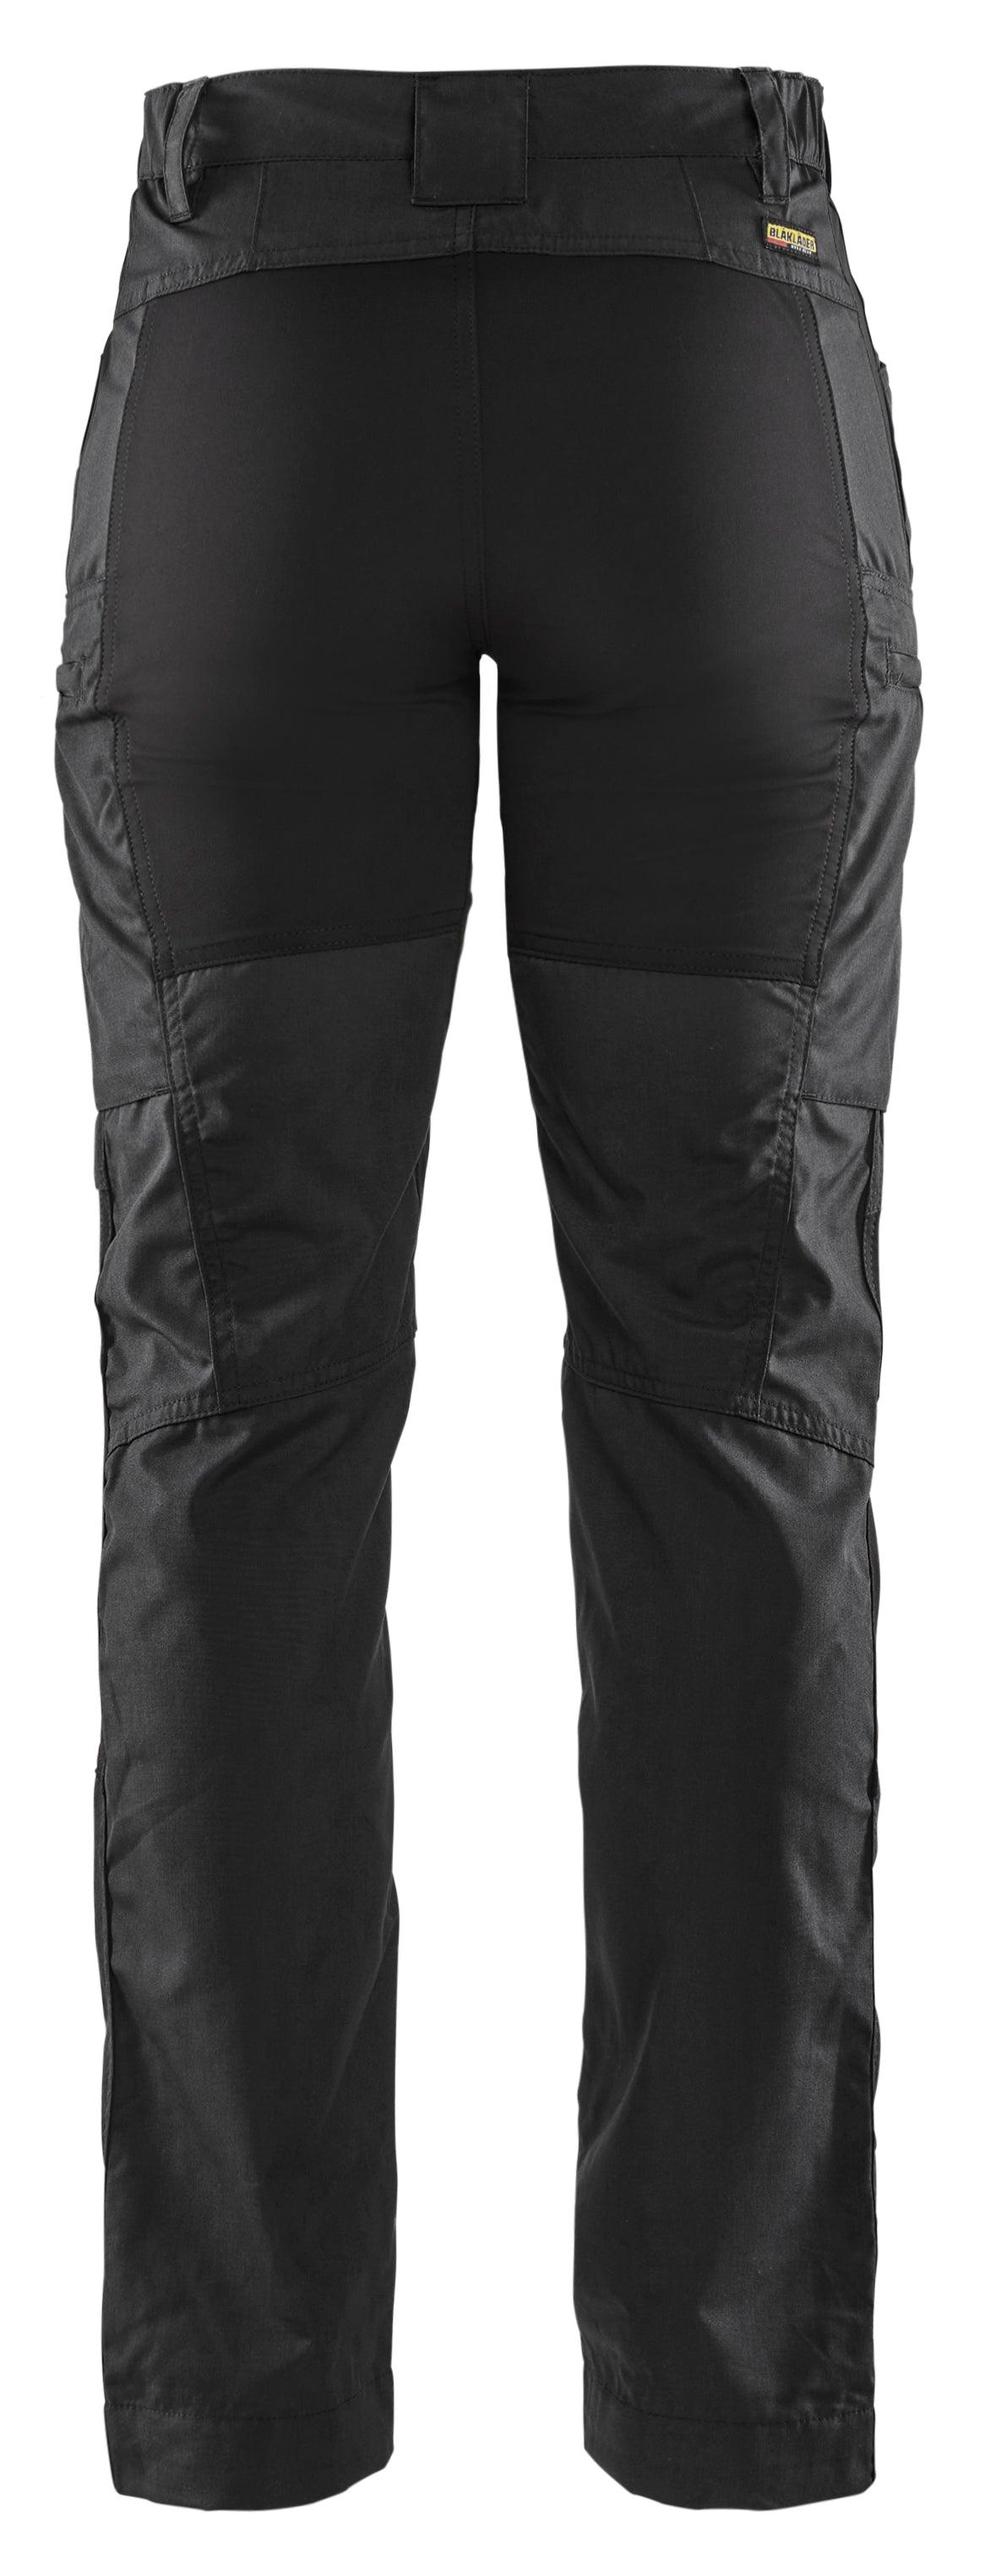 Blaklader 7159 5oz Women's Service Pants with Stretch - Black - Trusted Gear Company LLC